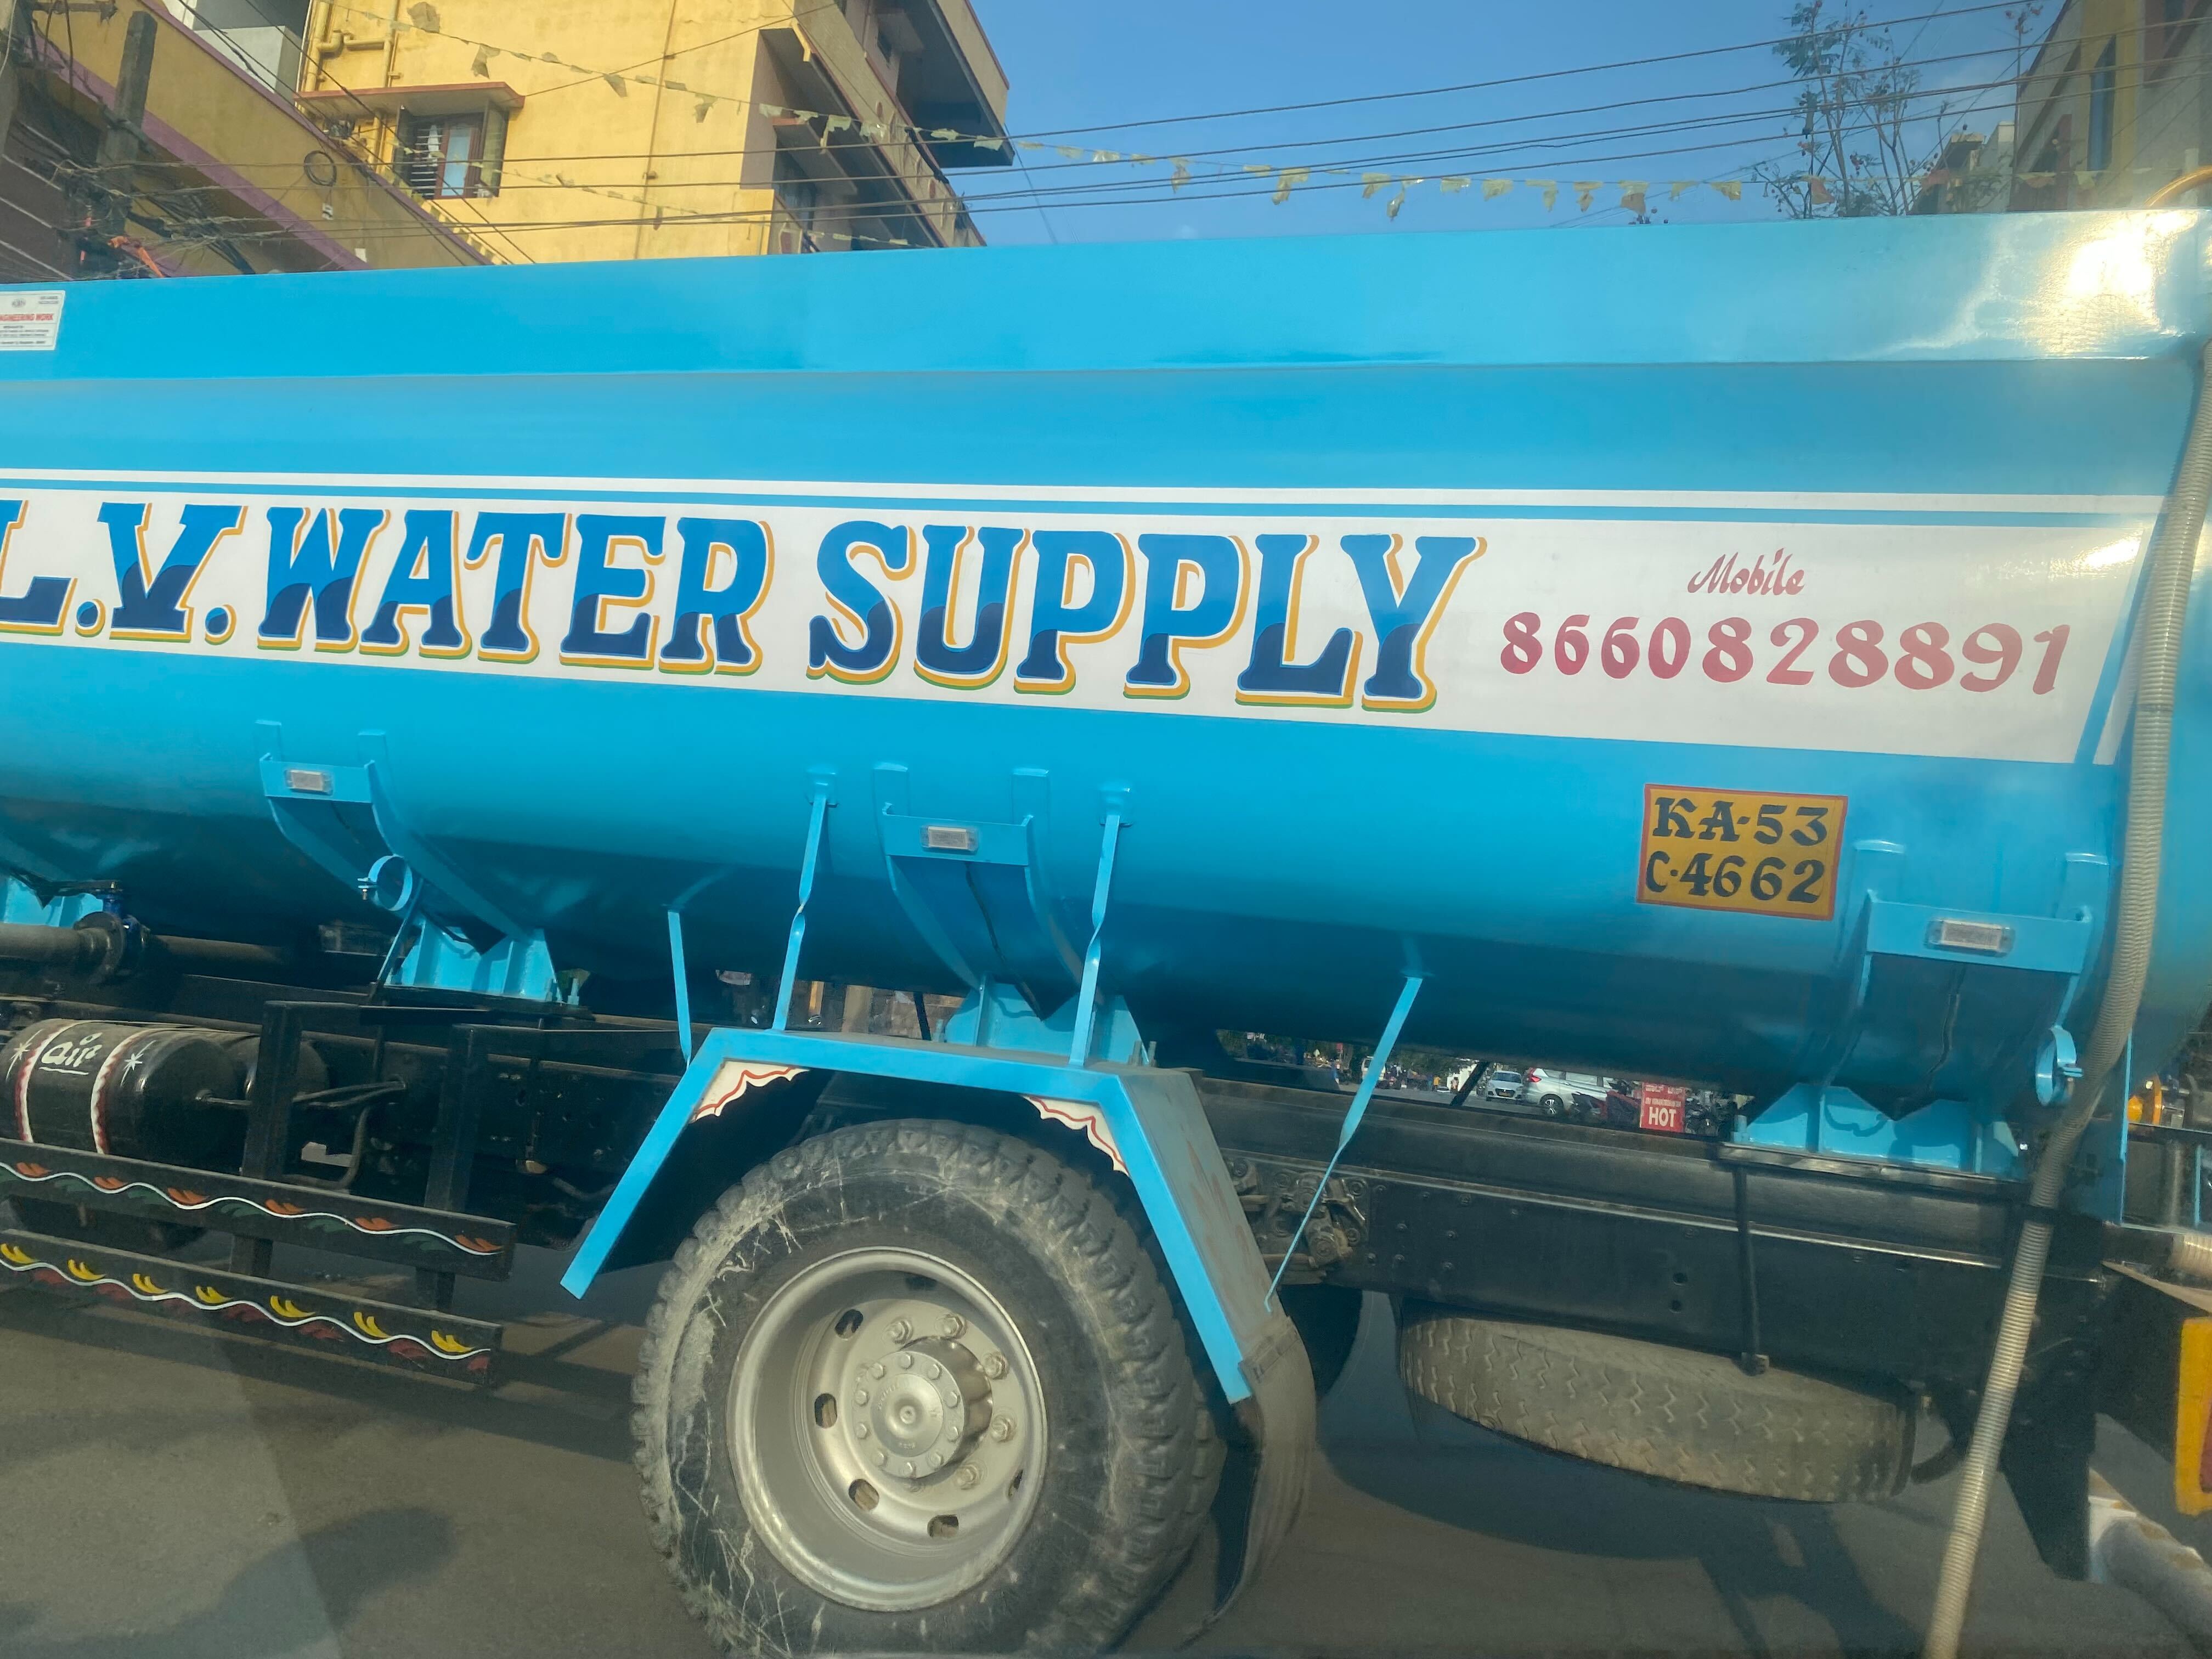 A private water tanker near Whitefield. Residents say they are now paying as much as 3,000 rupees (£300) for a tanker, five to six times the usual rate